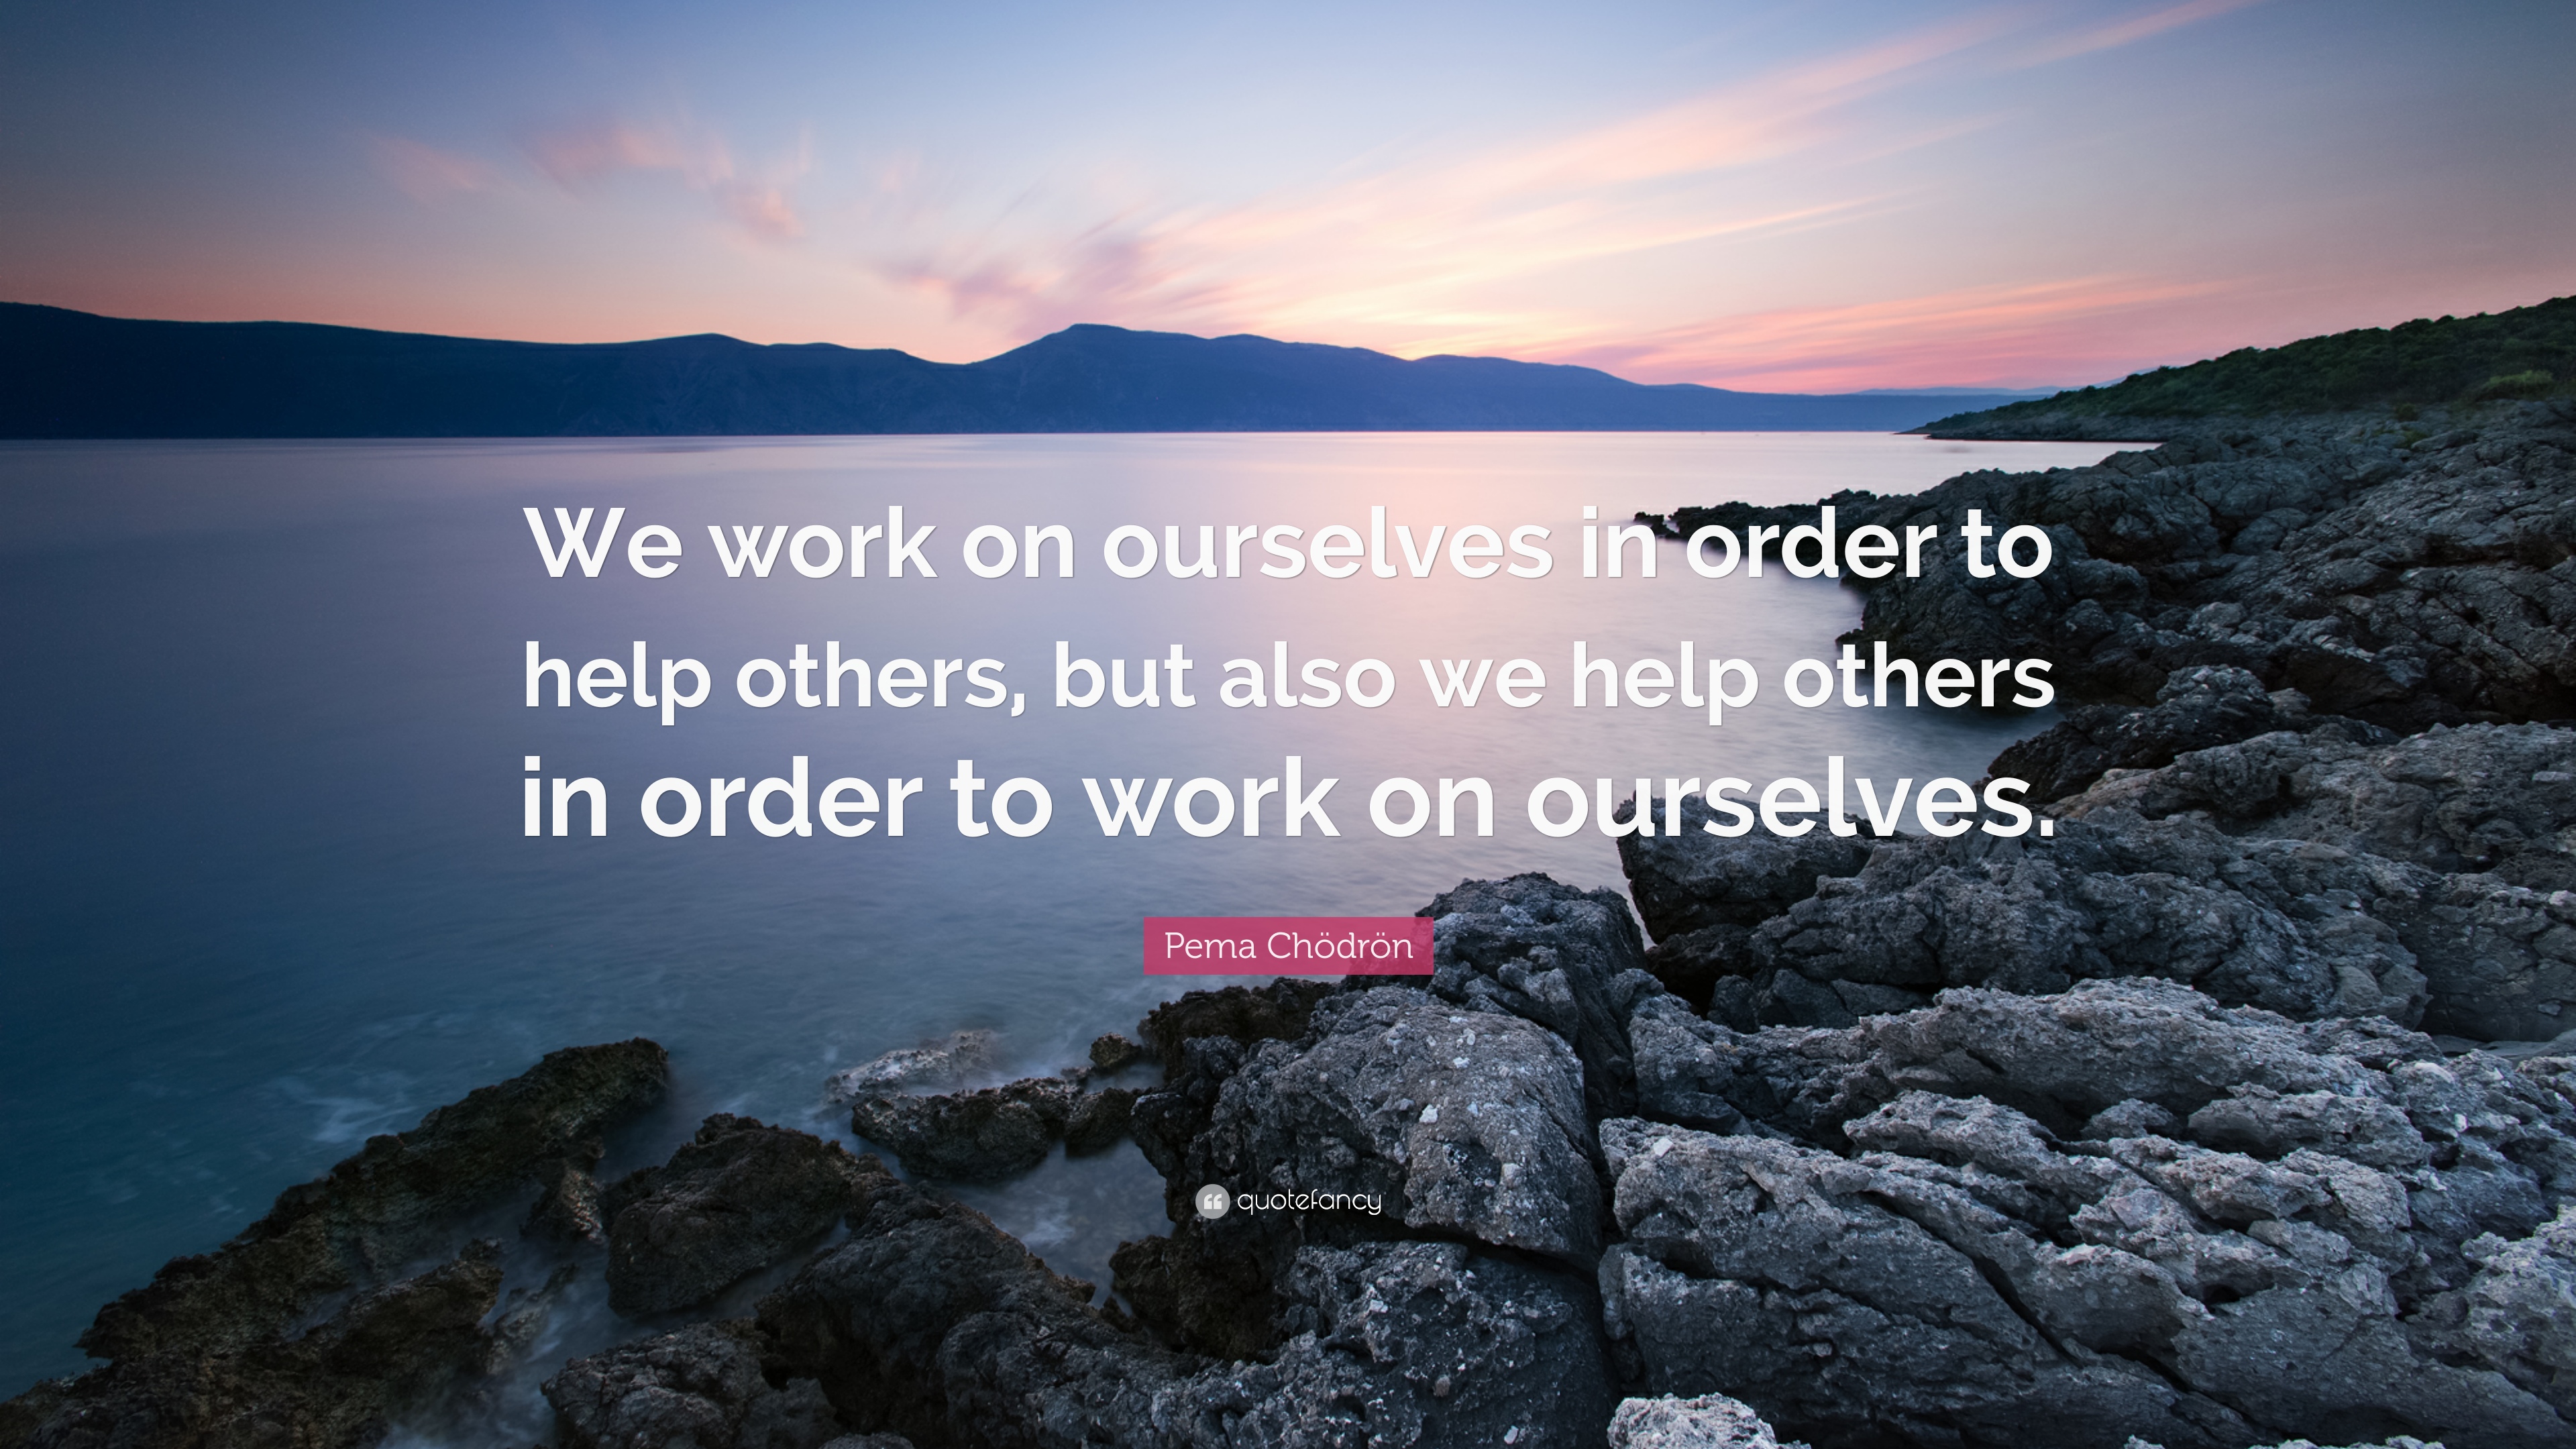 Pema Chödrön Quote: “We work on ourselves in order to help others, but also we help